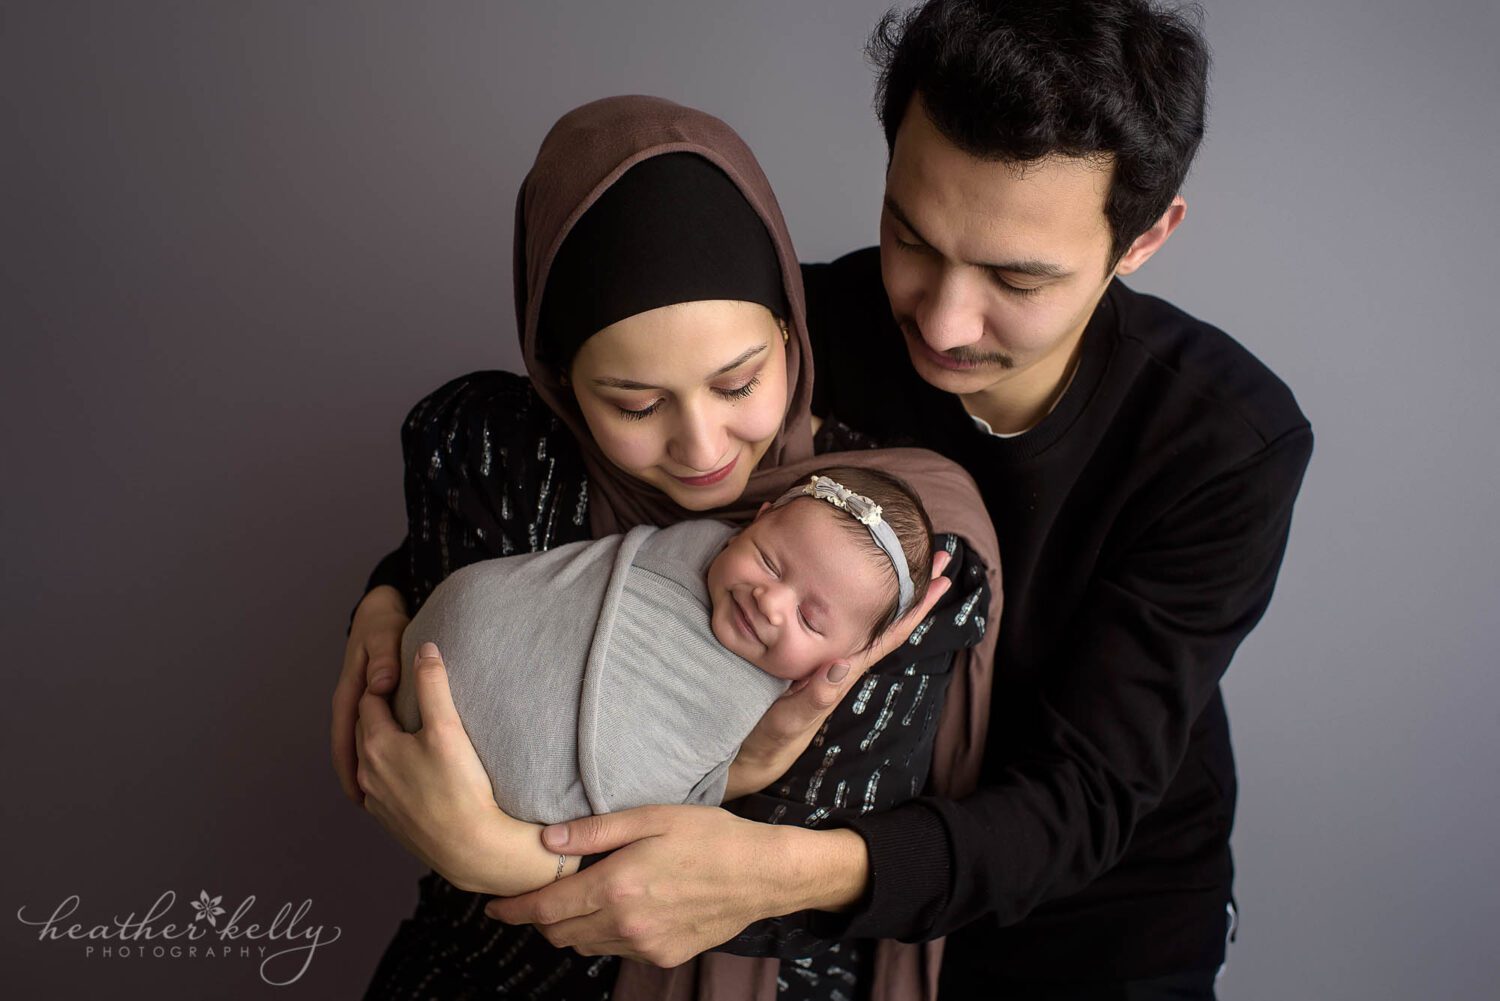 mom and dad holding their newborn baby girl. Newborn photography and family